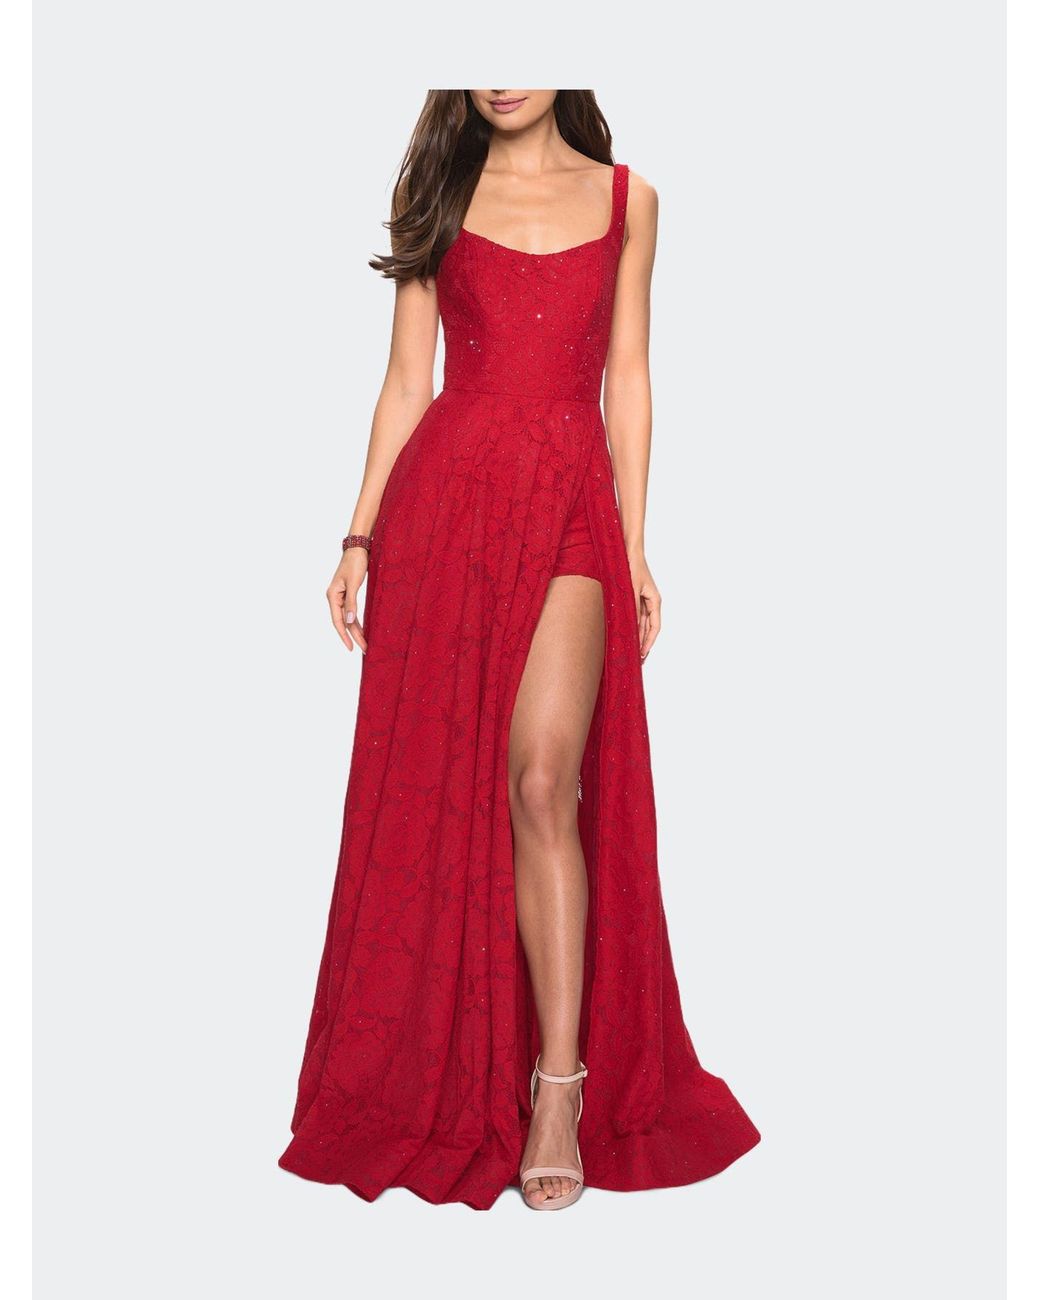 La Femme Long Lace Prom Dress With Attached Shorts in Red | Lyst